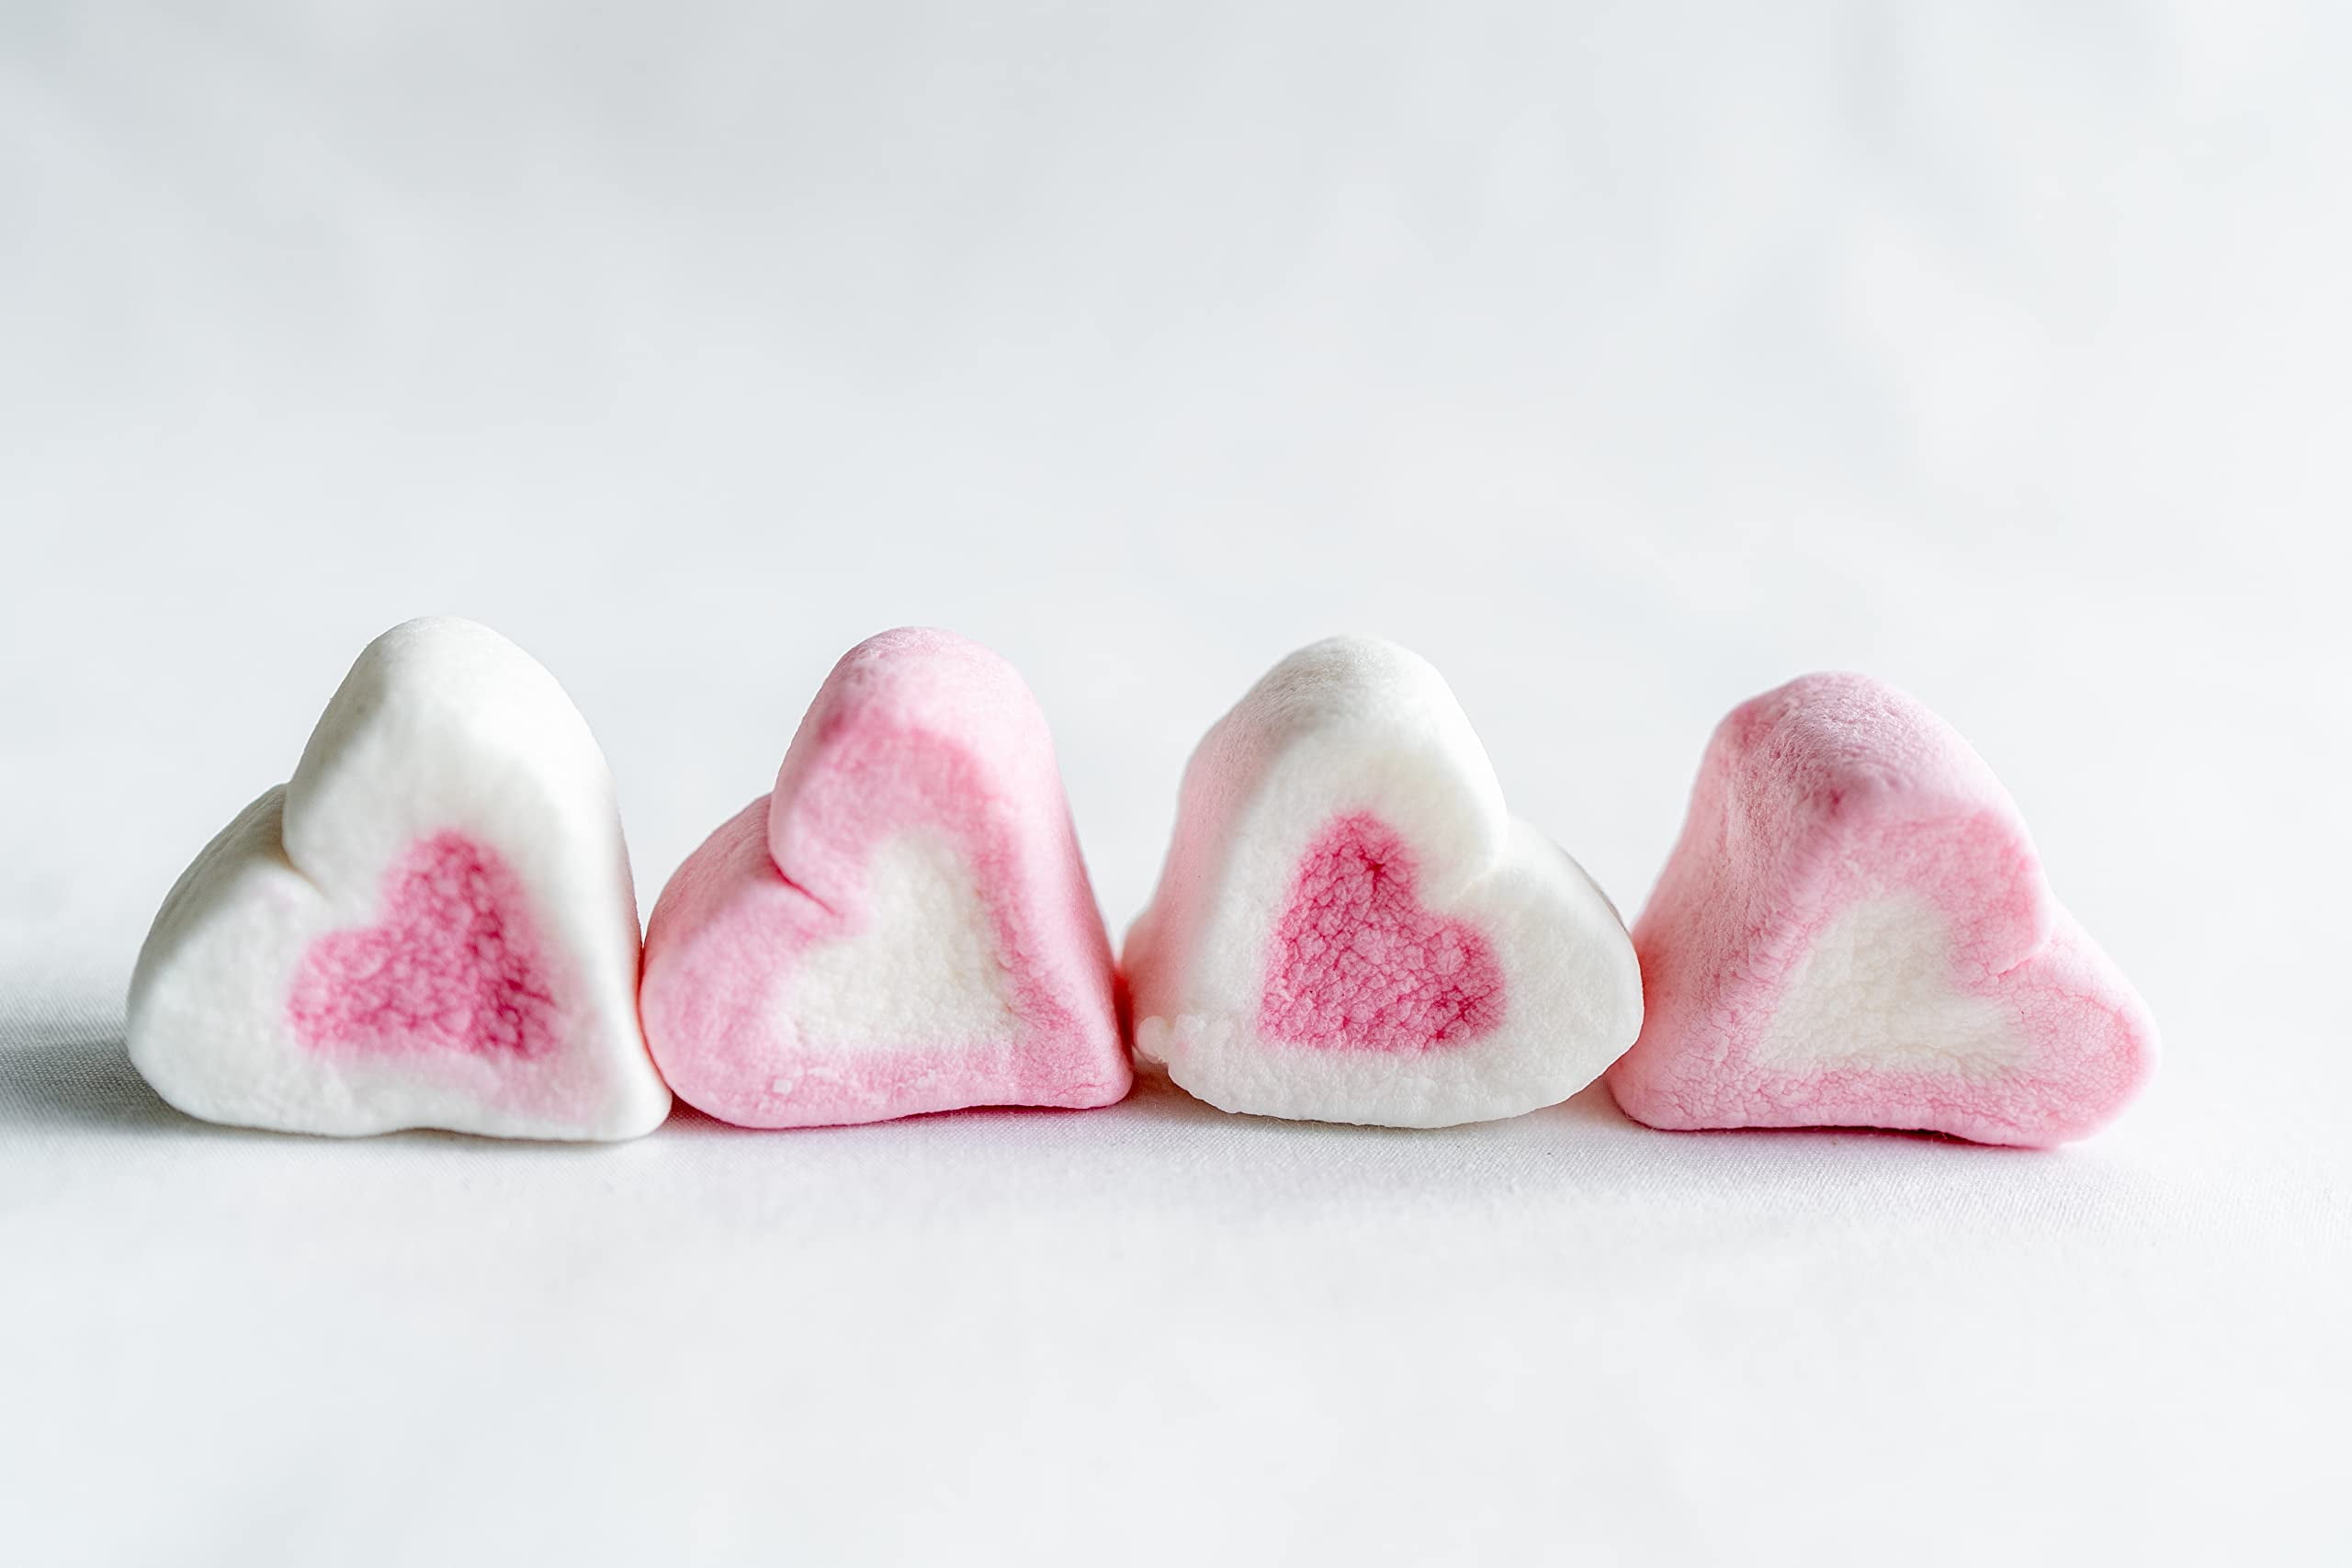 Colombina Valentines Day Heart Marshmallows - Natural Flavor 7 Oz/198gm